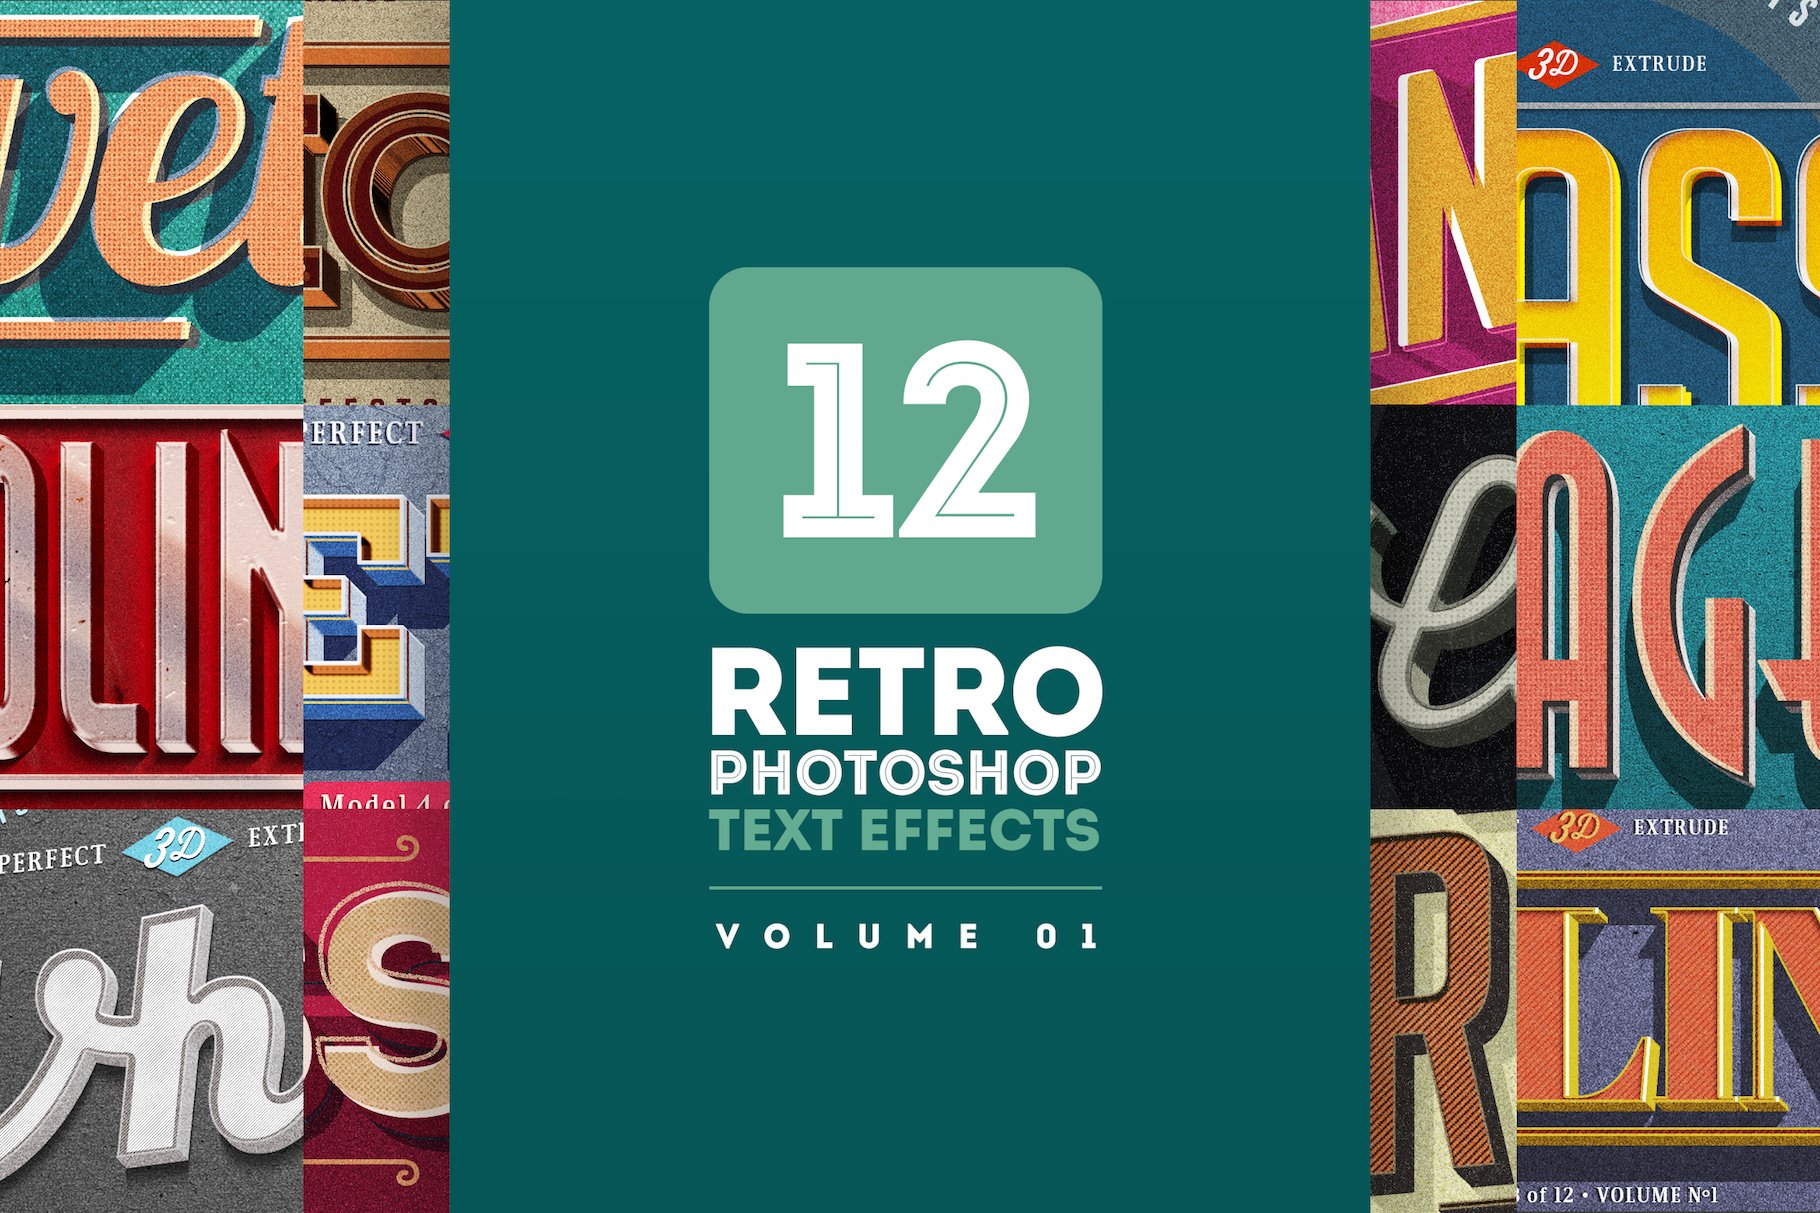 Retro Text Effects V.01cover image.